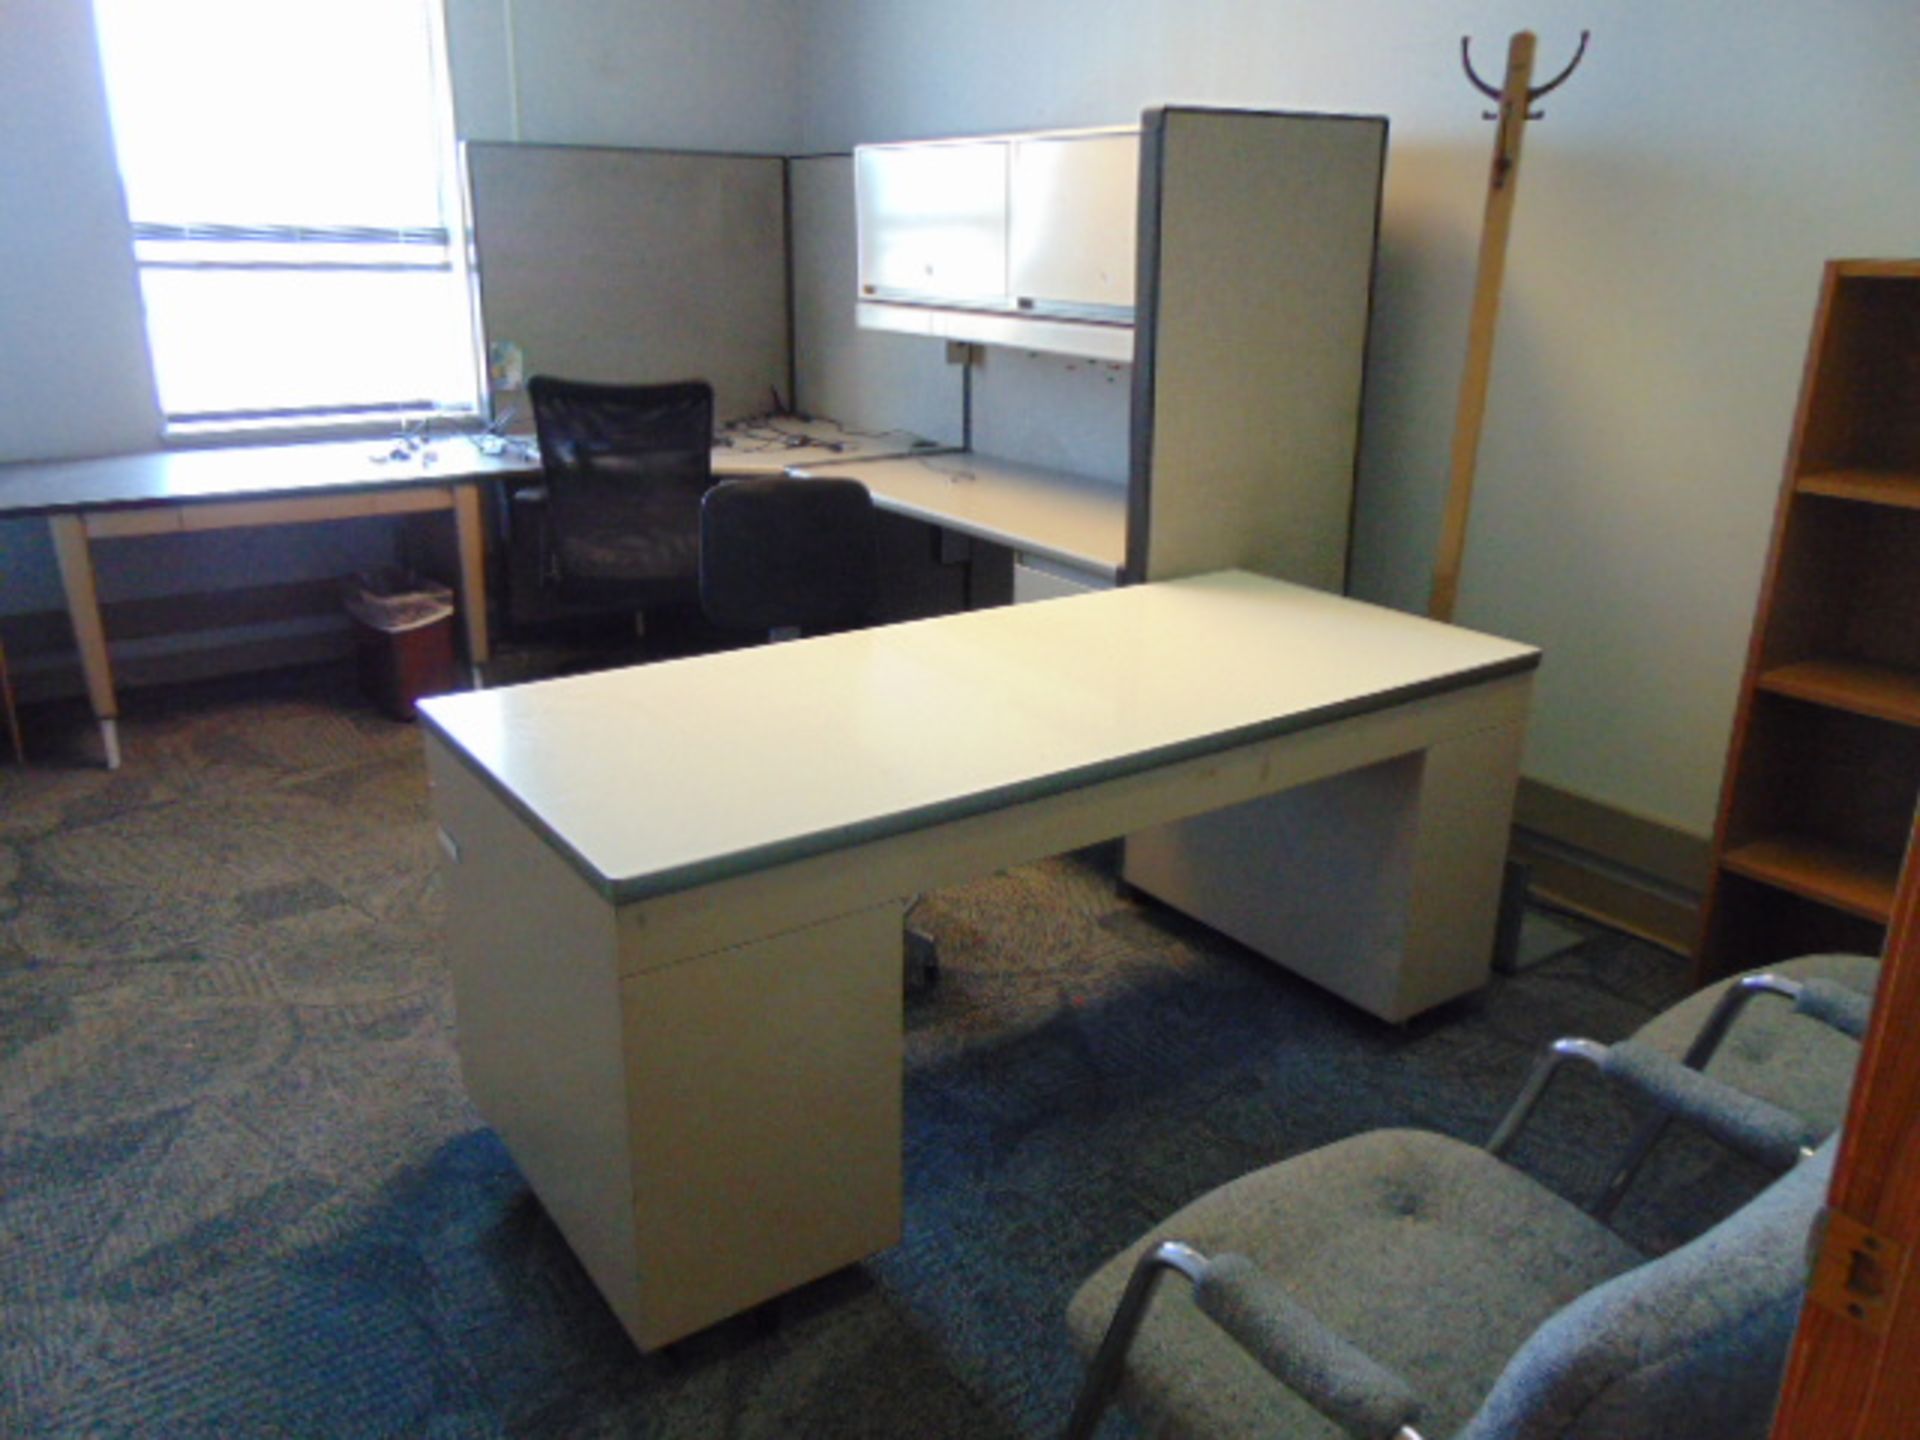 LOT CONSISTING OF: office cubicle, bookcase, (2) desks & (4) chairs (located upstairs)